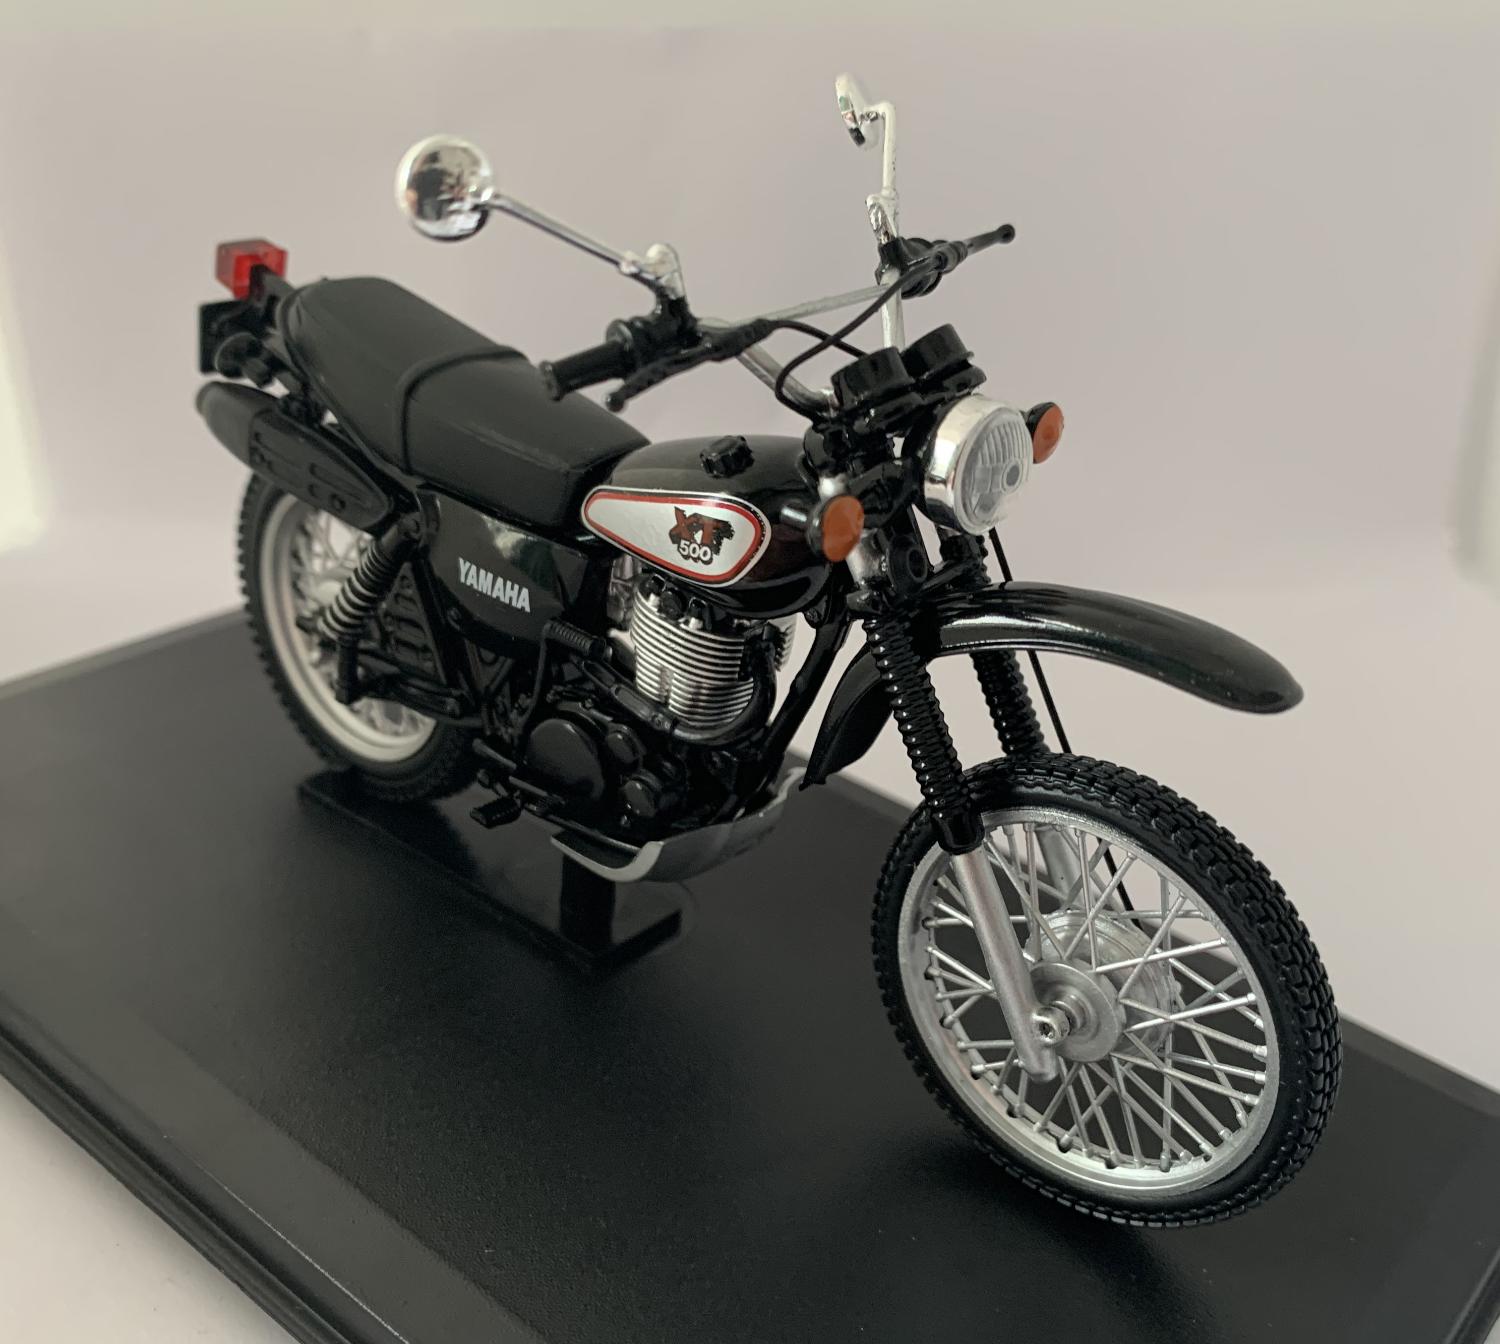 An accurate scale model of a 1988 Yamaha XT 500 decorated in black and silver with authentic graphics and silver spike wheels. Other trims are finished in chrome, black and silver. Features include moveable steering, instrument detail, working stand, rubber rolling wheels and real looking seat.